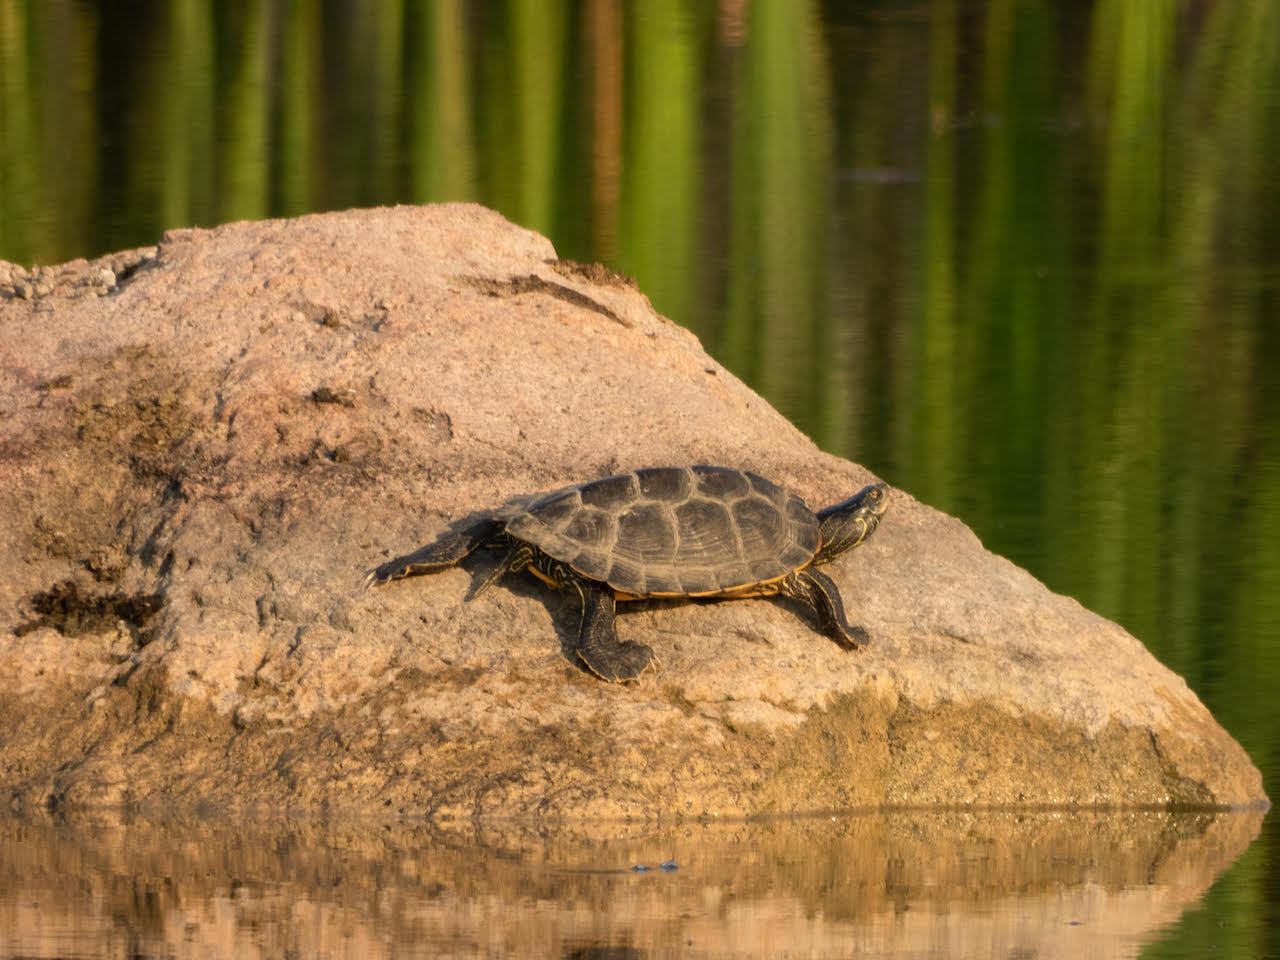 “Northern Map Turtle” by Astraia Doran of Riverview Park & Zoo.